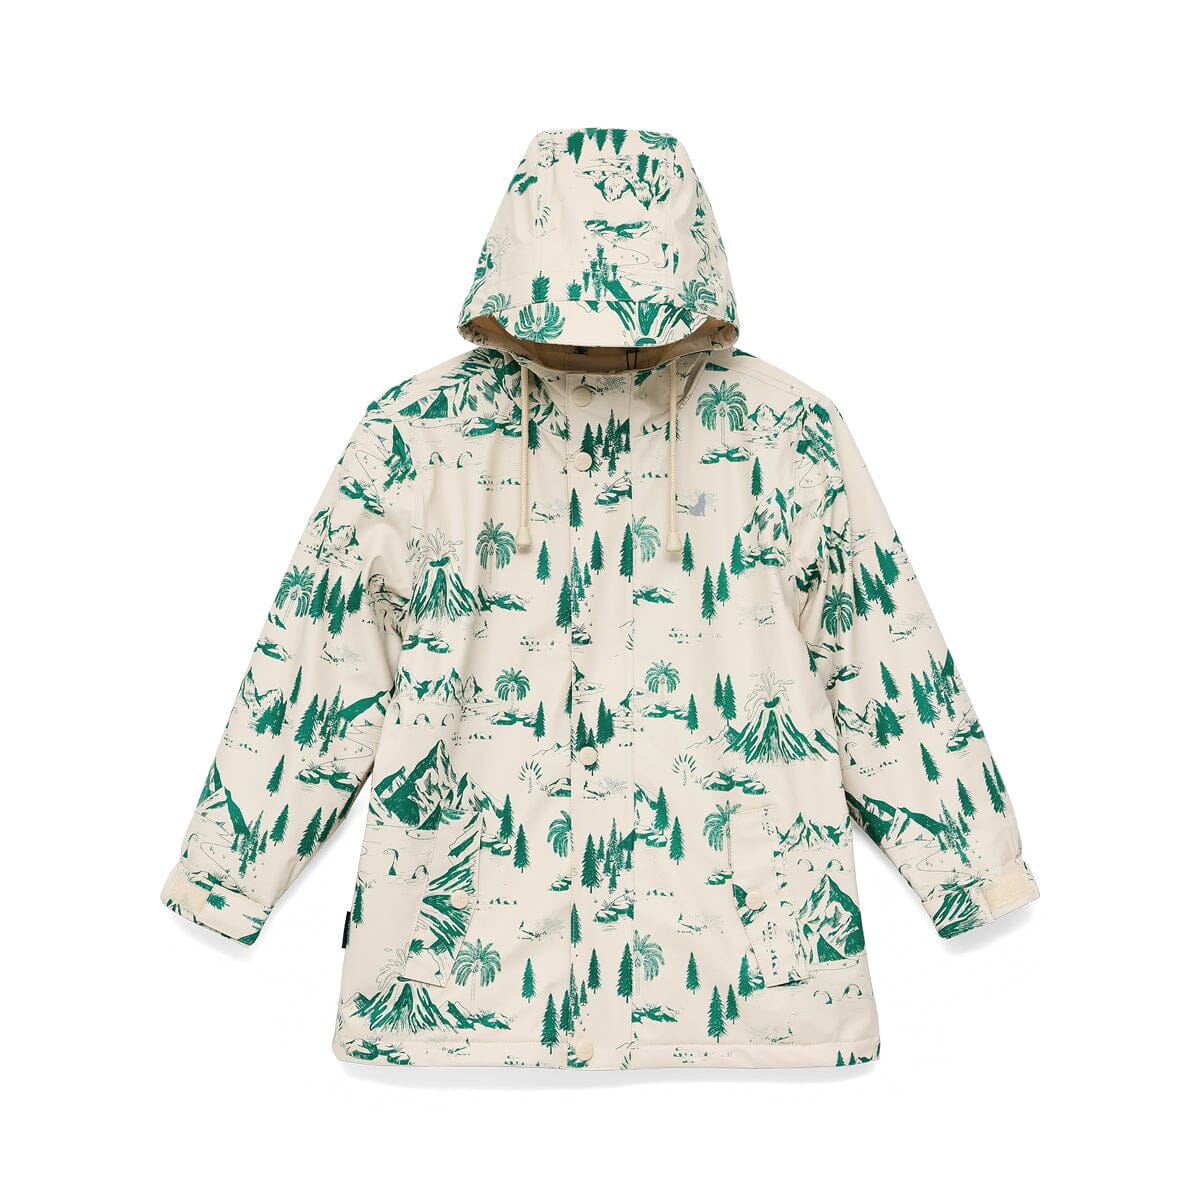 Crywolf | EXPLORER JACKET - Forest Landscape *** PRE ORDER / DUE EARLY-MID APRIL *** Boys Crywolf